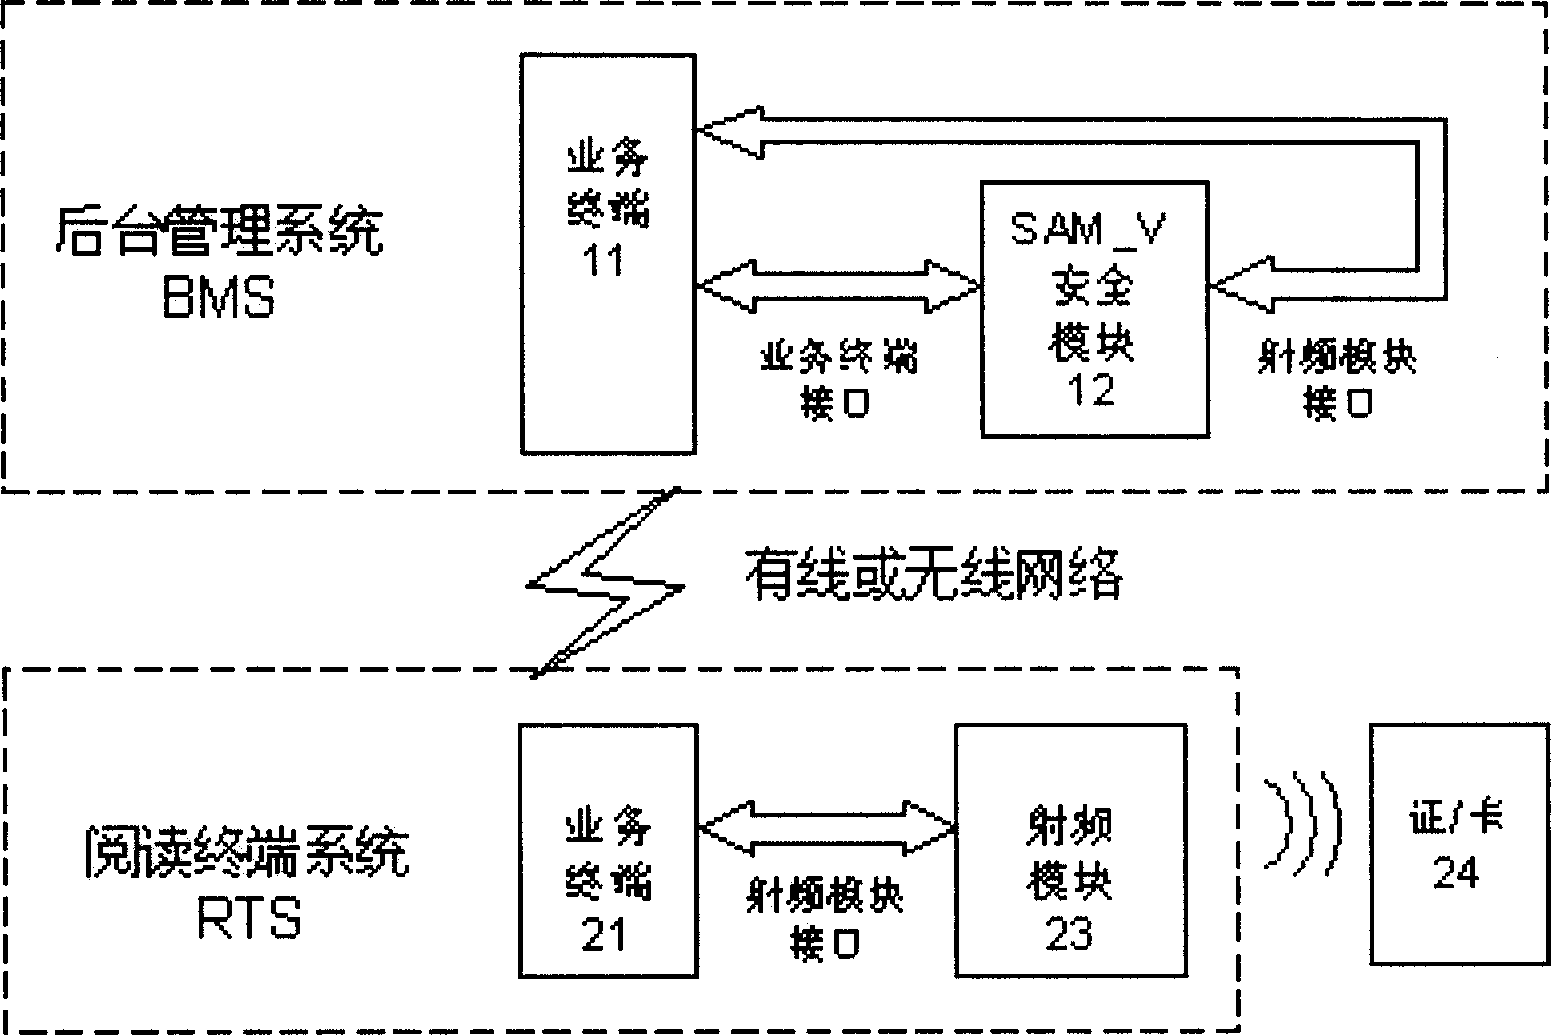 Network reading system for resident identity card